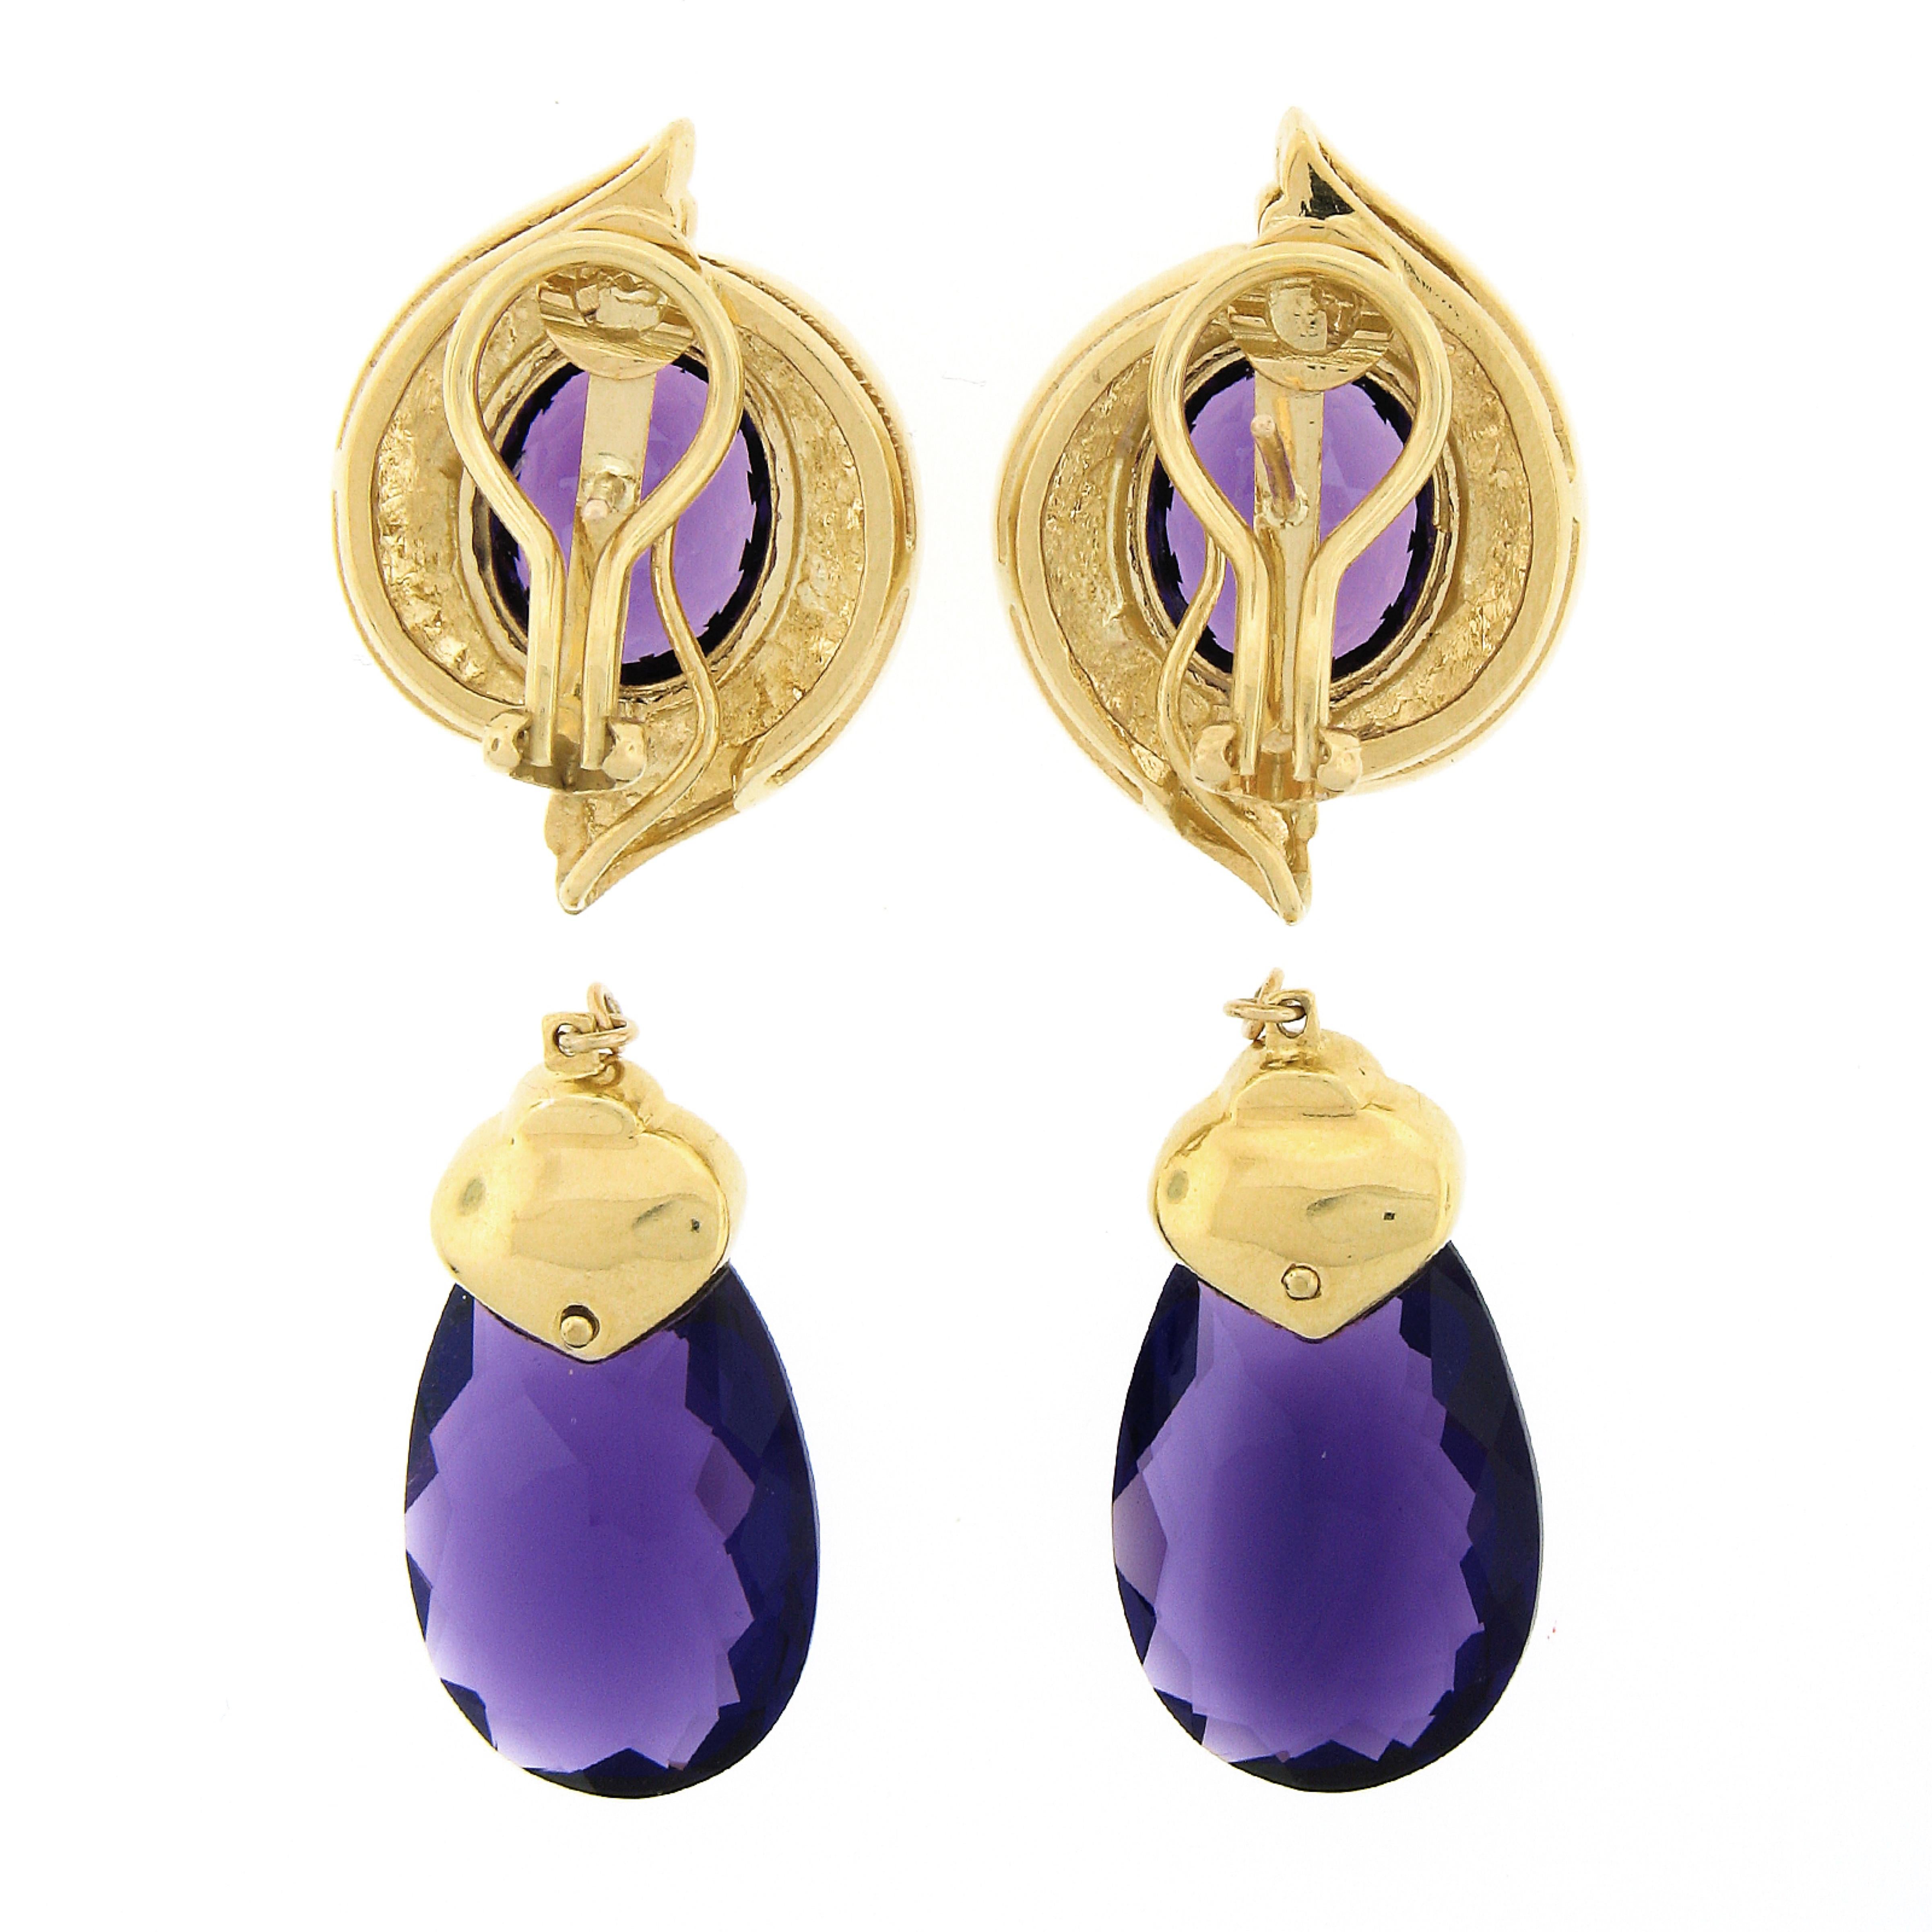 This stunning and truly magnificent pair of amethyst and diamond enhancer earrings is crafted from solid 18k yellow gold and features an absolutely bold and elegant design. The amethyst stones on this pair of earrings are HIGH QUALITY, and are are